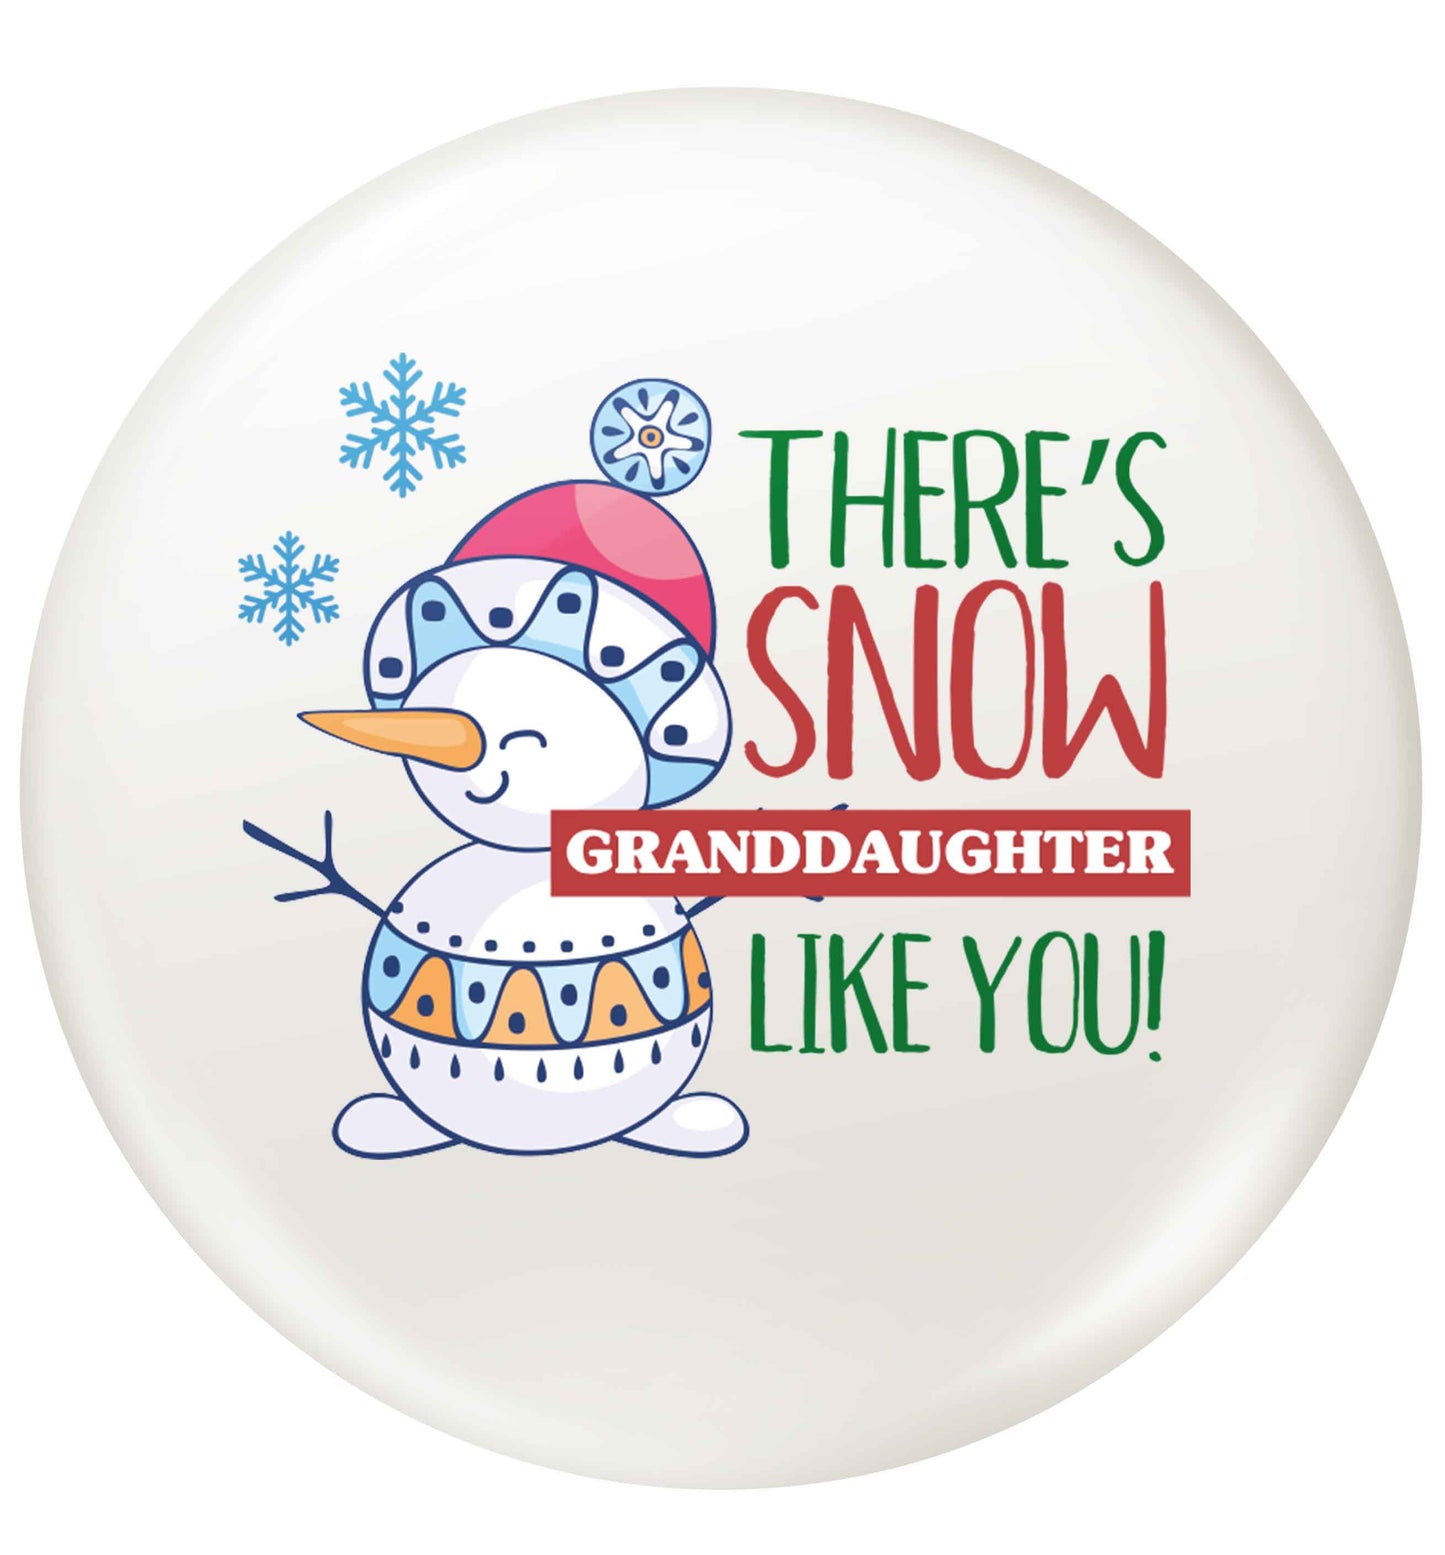 There's snow granddaughter like you small 25mm Pin badge